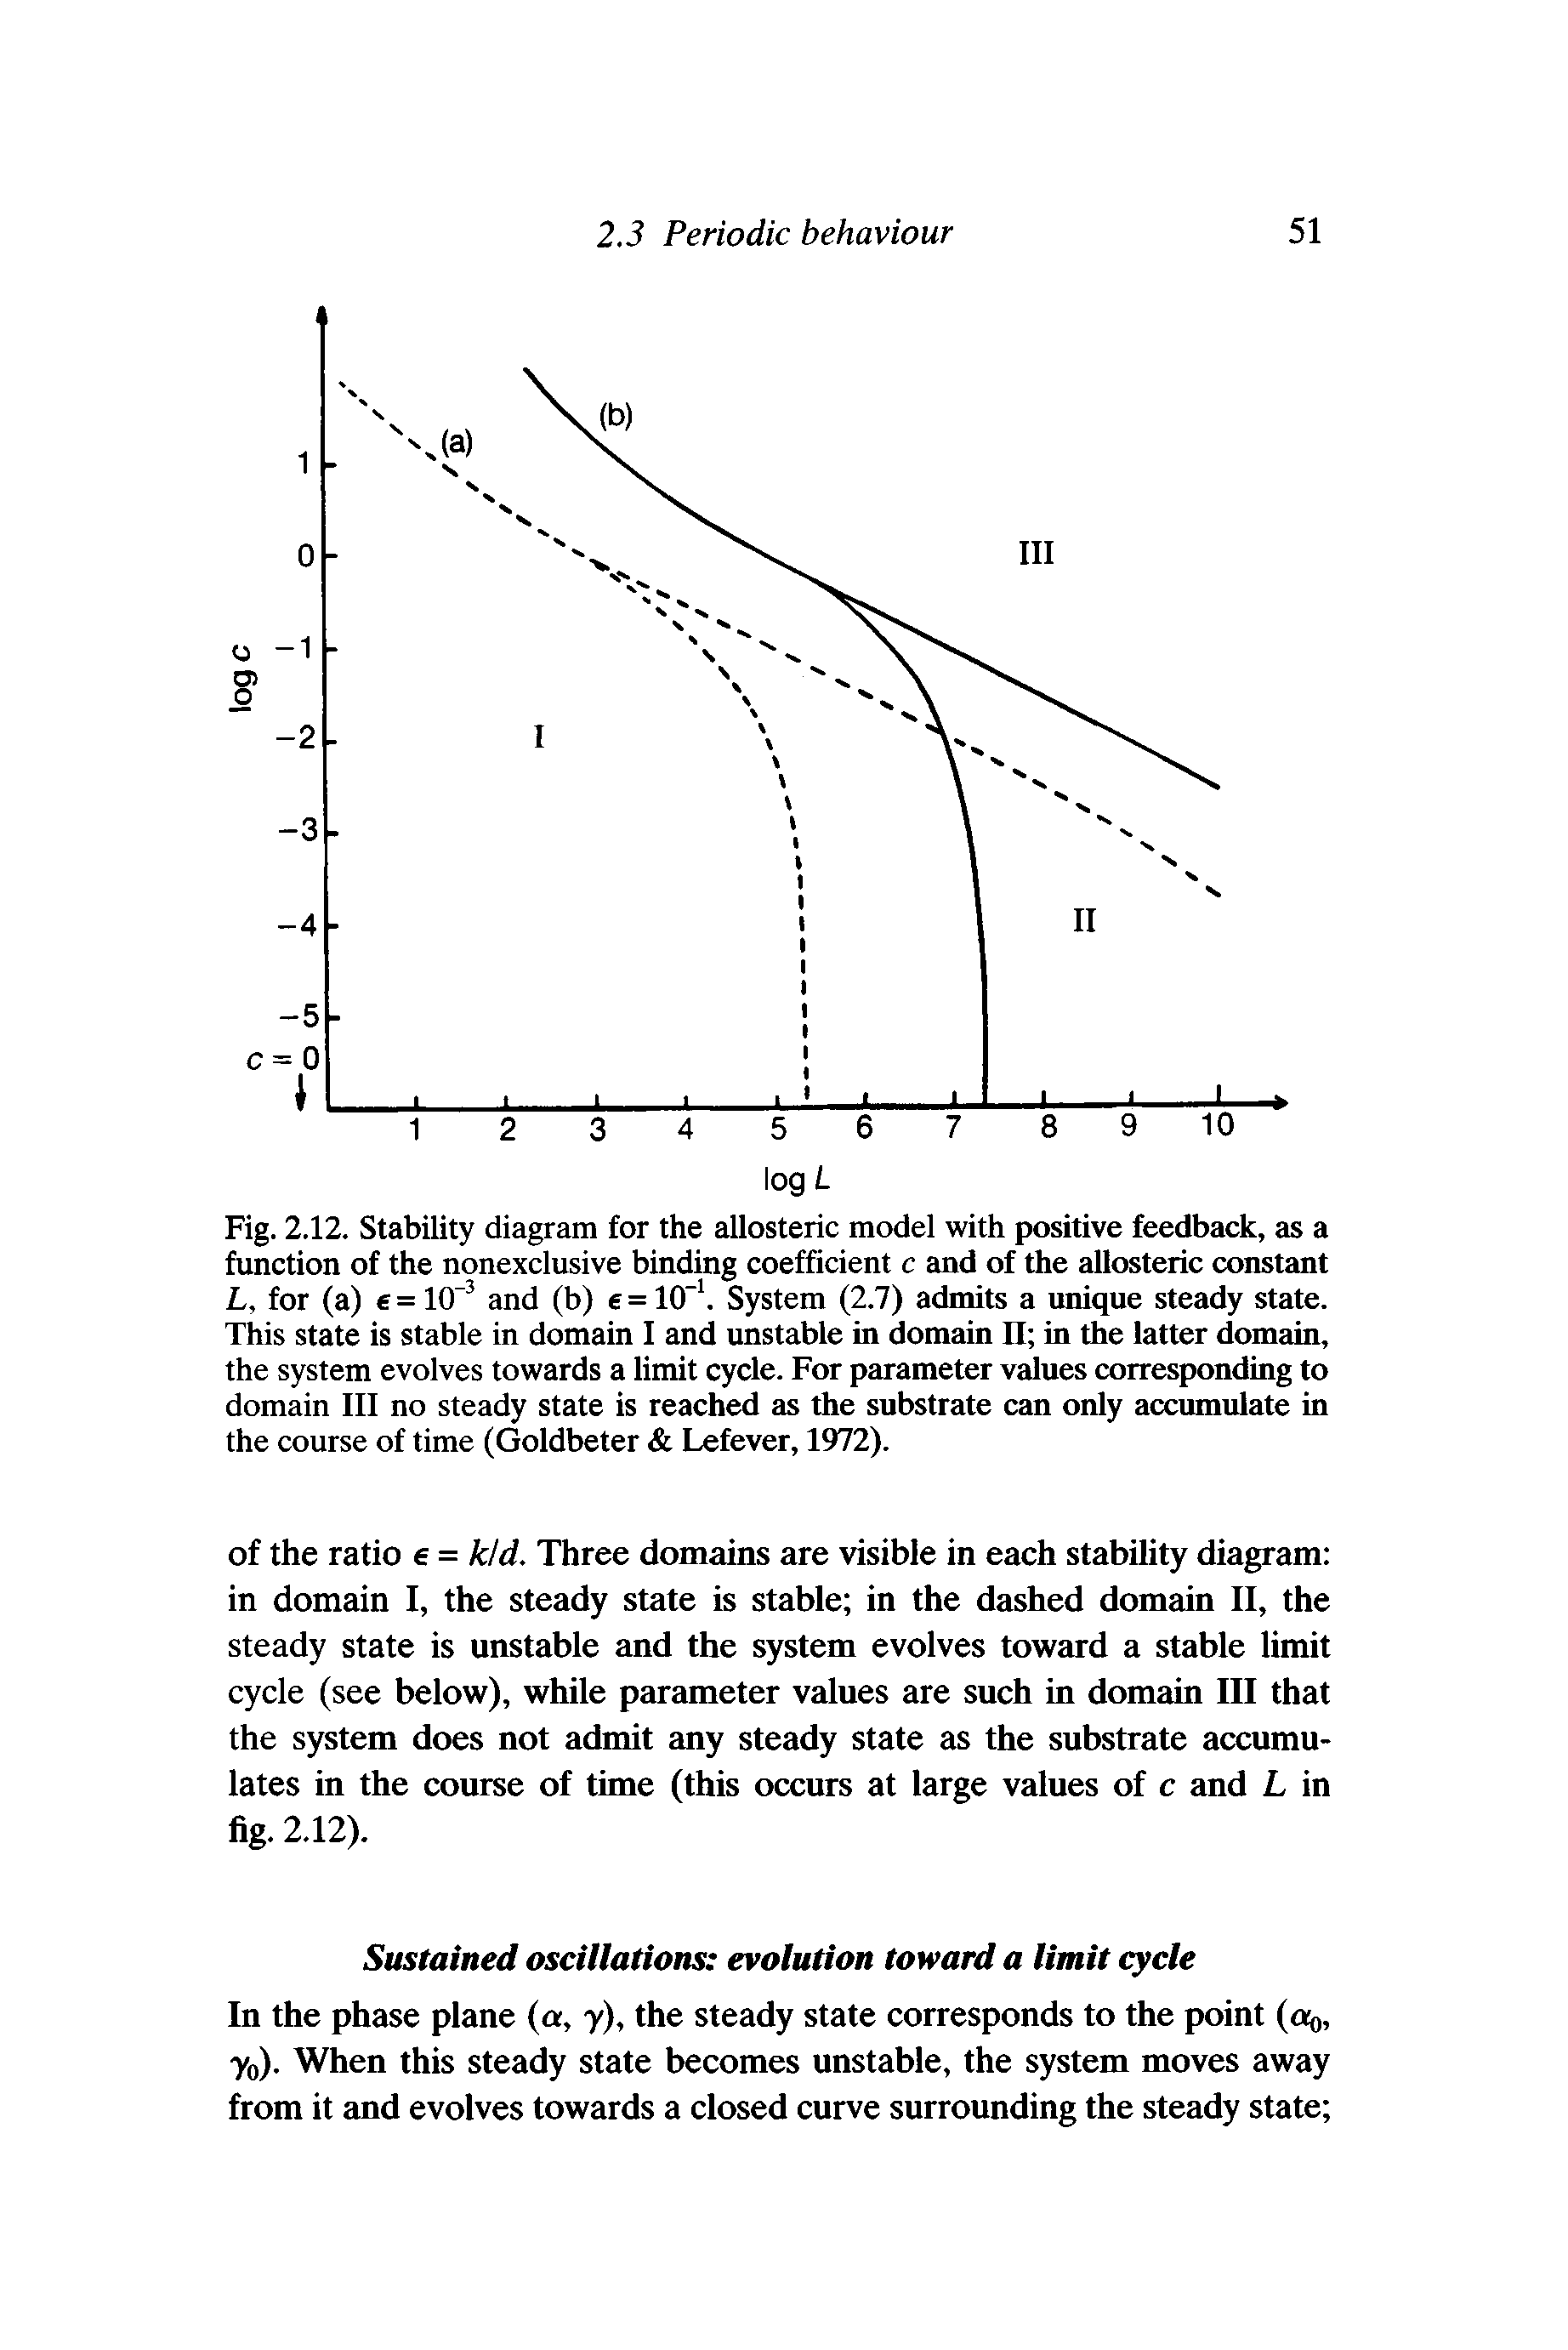 Fig. 2.12. Stability diagram for the allosteric model with positive feedback, as a function of the nonexclusive binding coefficient c and of the allosteric constant L, for (a) = 10 and (b) e = 10". System (2.7) admits a unique steady state. This state is stable in domain I and unstable in domain II in the latter domain, the system evolves towards a limit cycle. For parameter values corresponding to domain III no steady state is reached as the substrate can only accumulate in the course of time (Goldbeter Lefever, 1972).